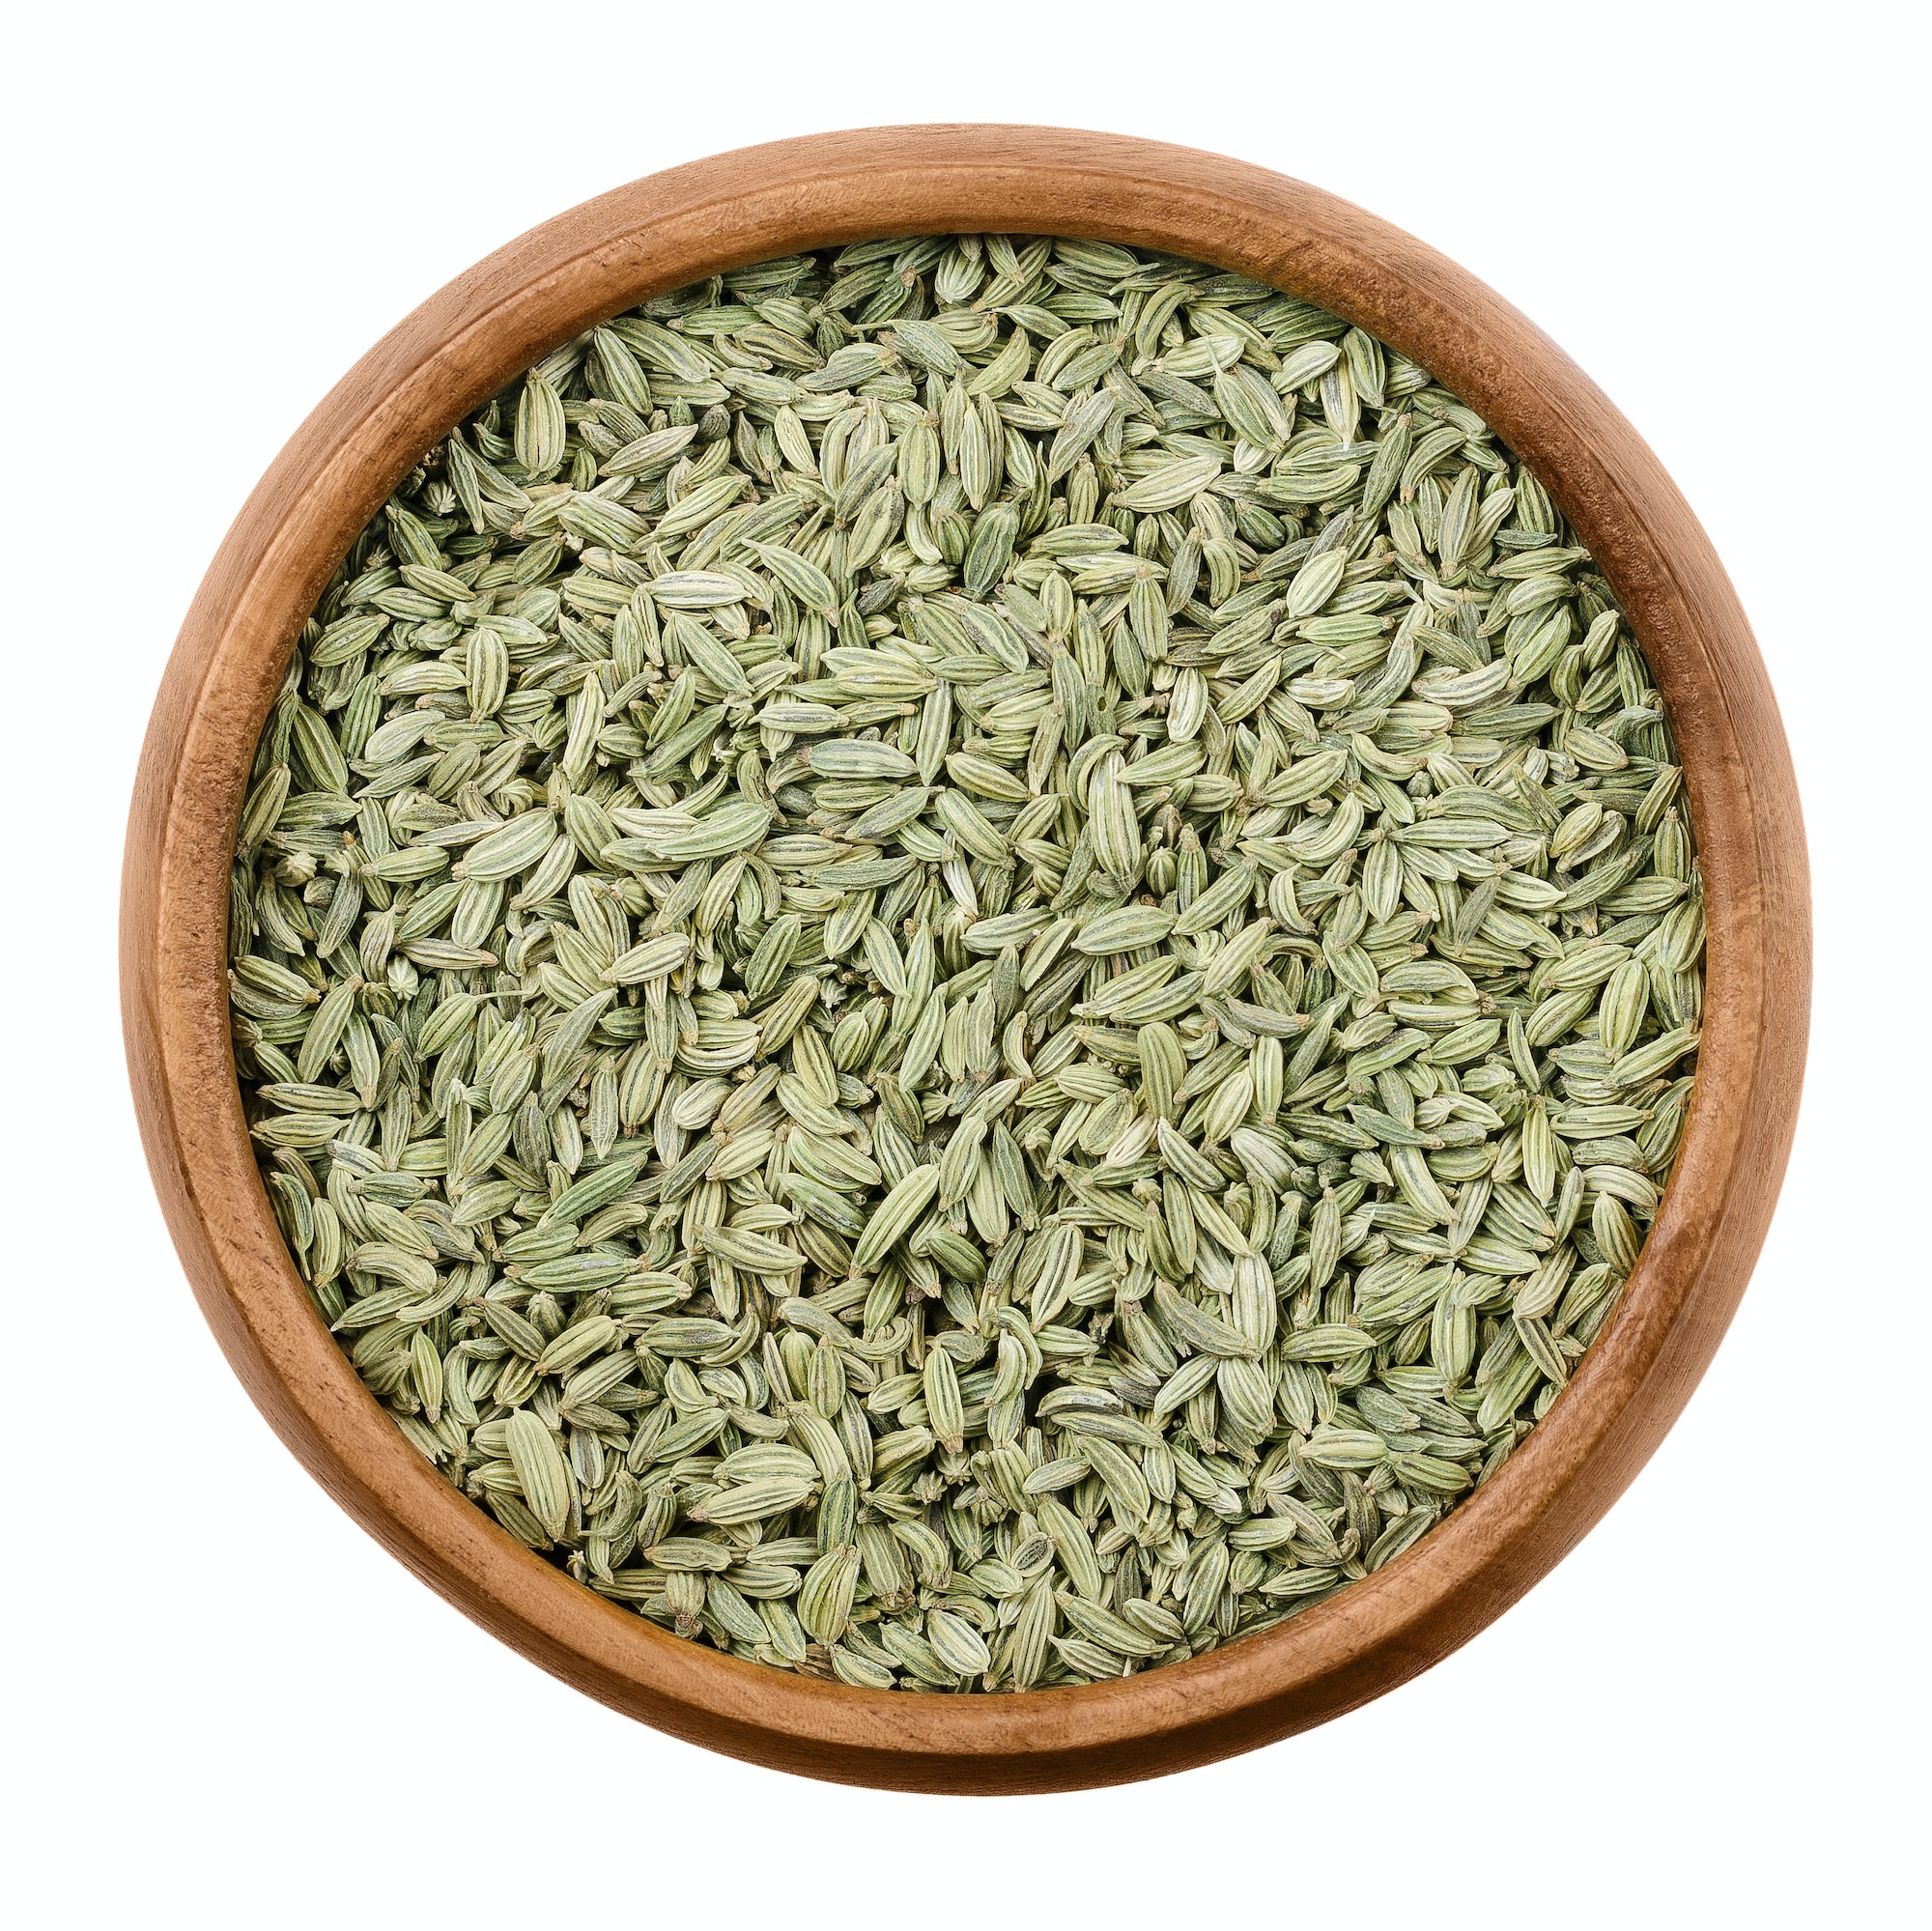 Fennel seeds in a wooden bowl over white